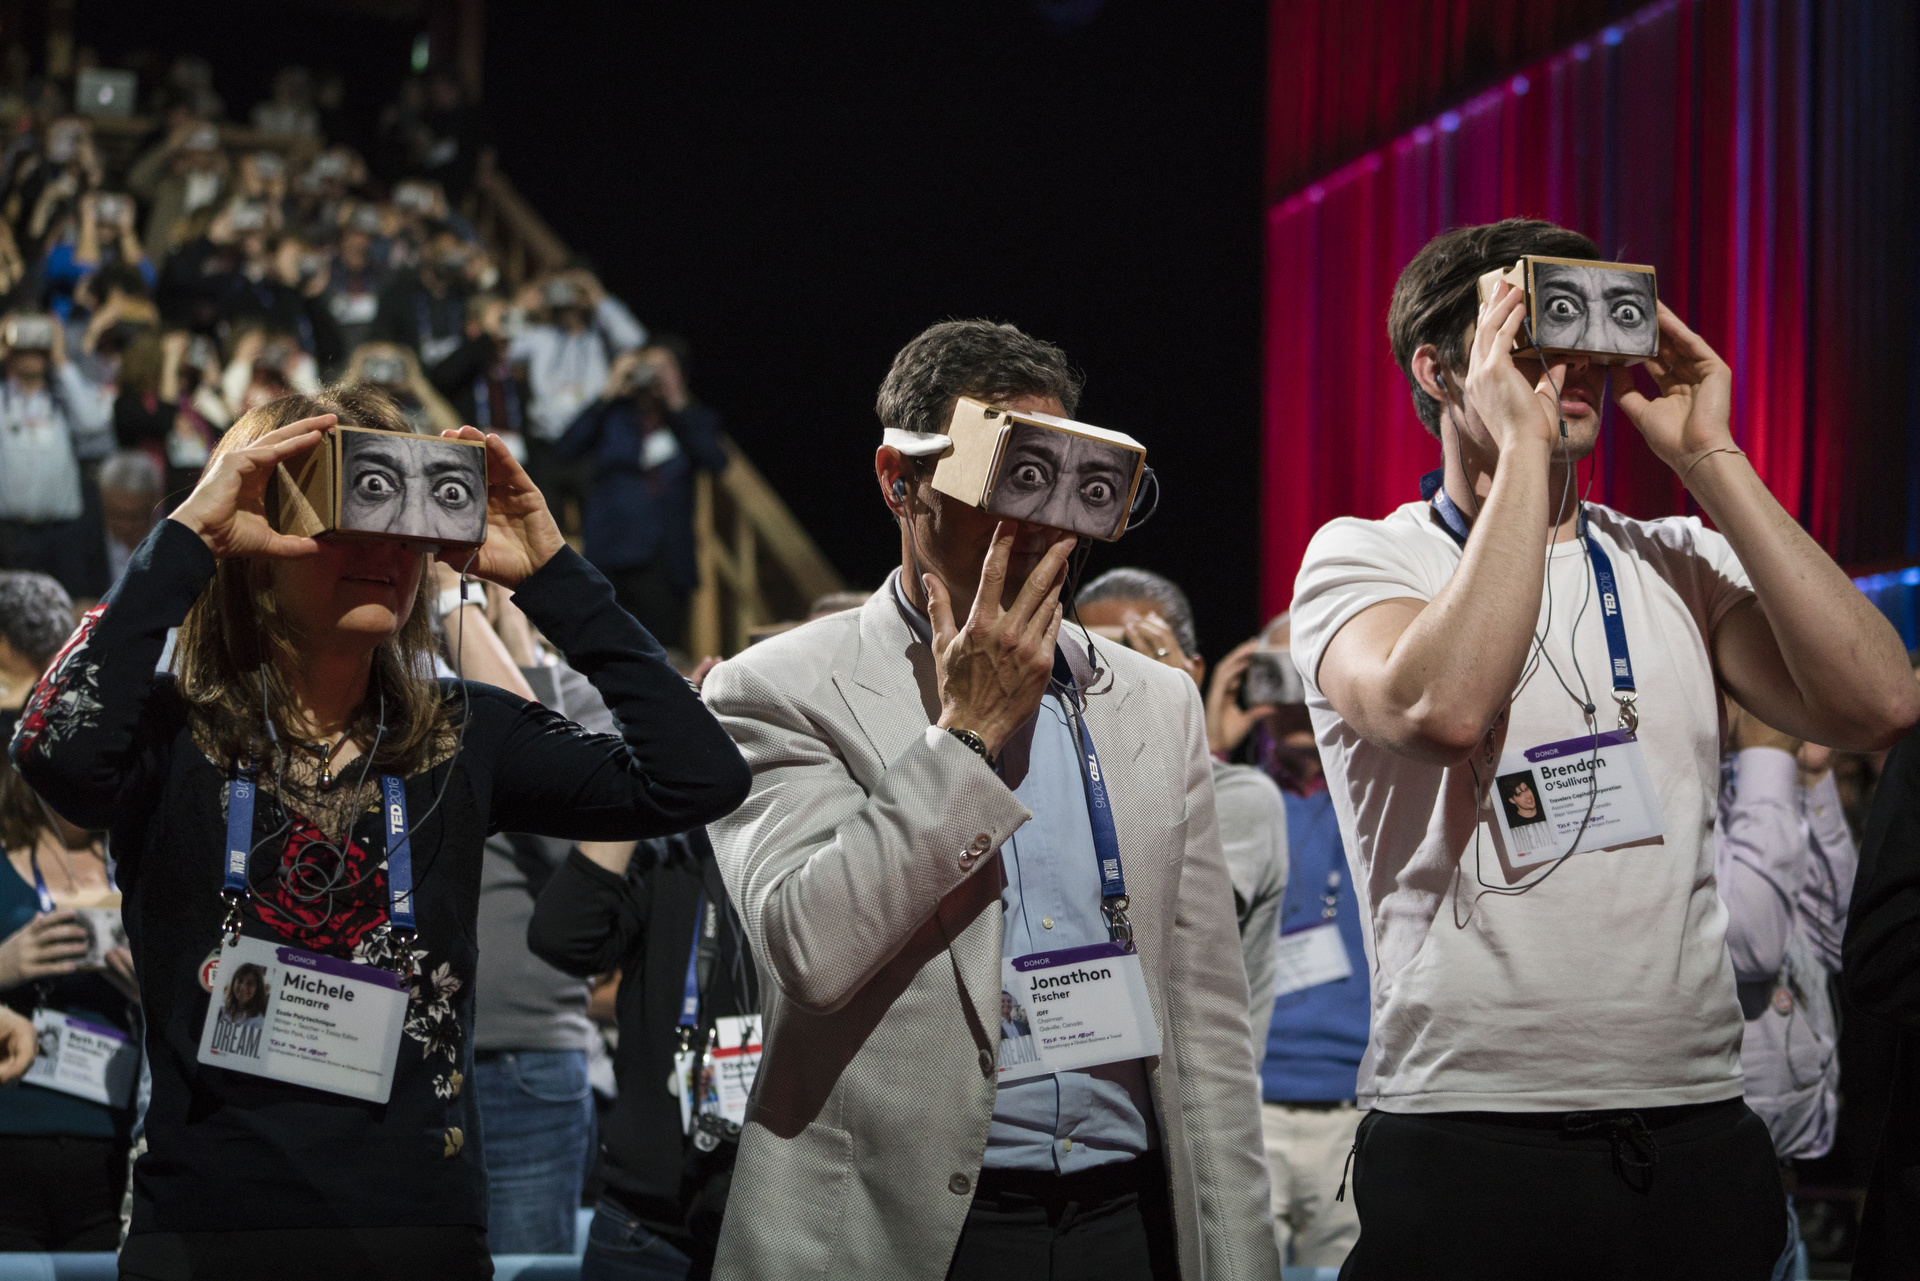 Chris Milk's virtual reality demo at TED2016 - Dream, February 15-19, 2016, Vancouver Convention Center, Vancouver, Canada. Photo: Bret Hartman / TED